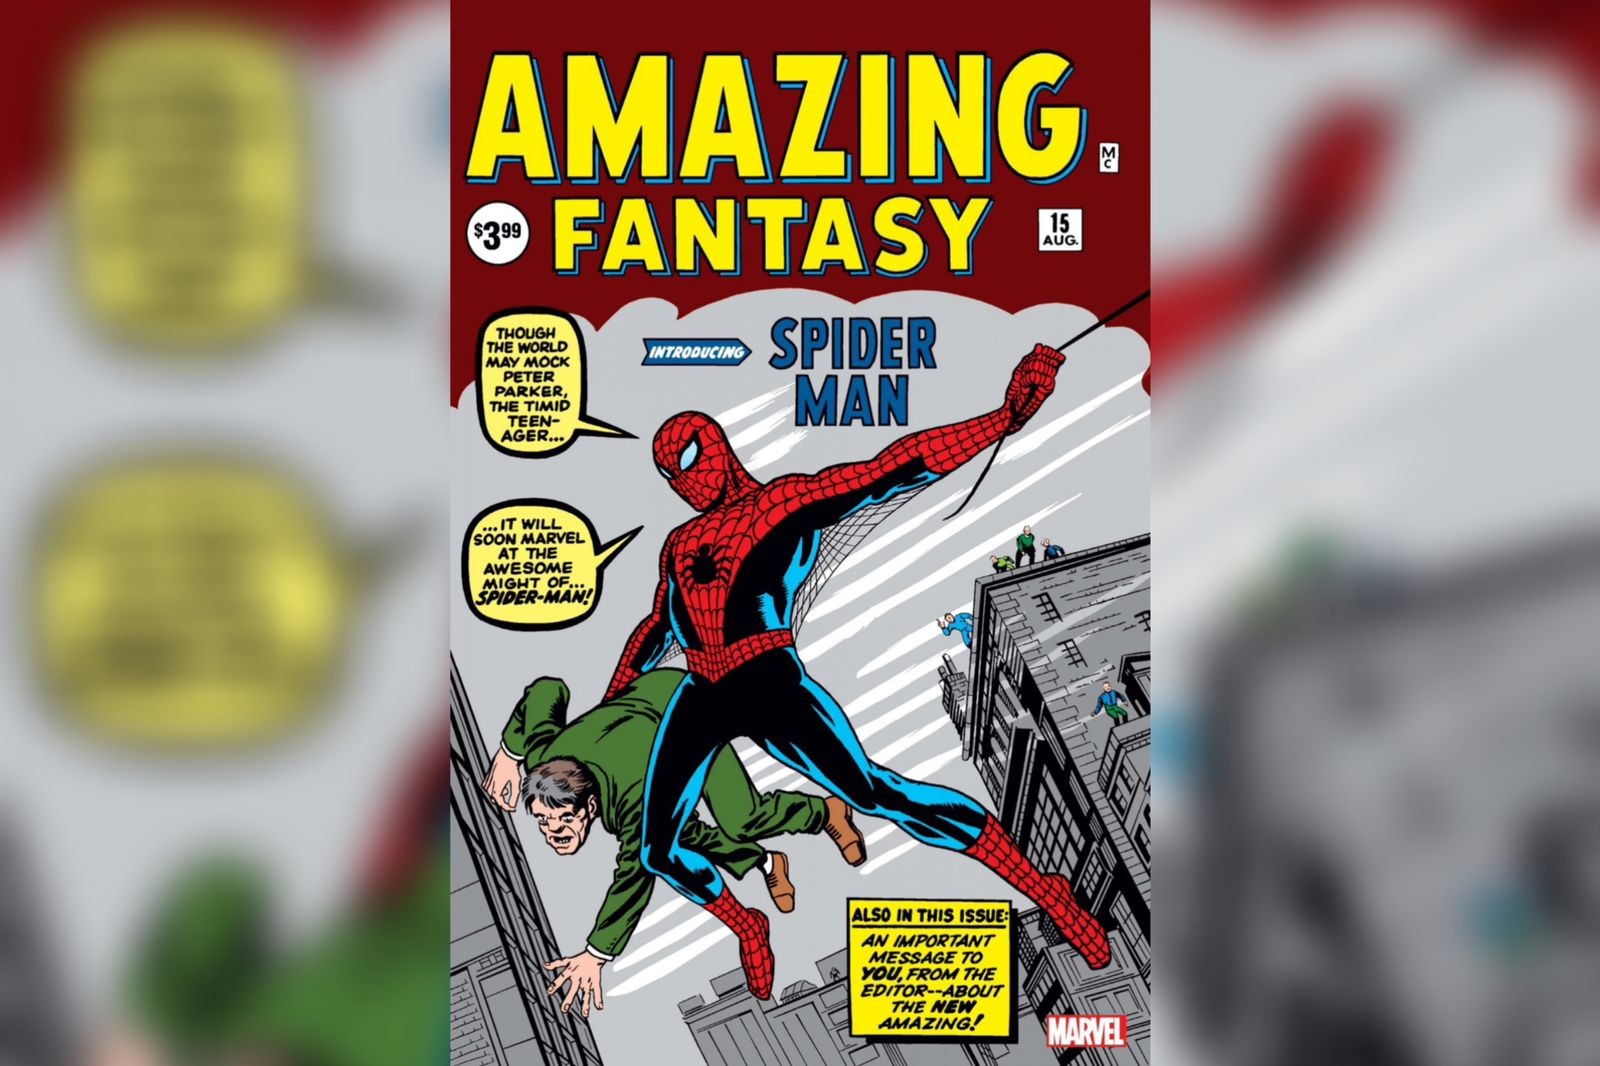 Spider-Man's first comic appearance